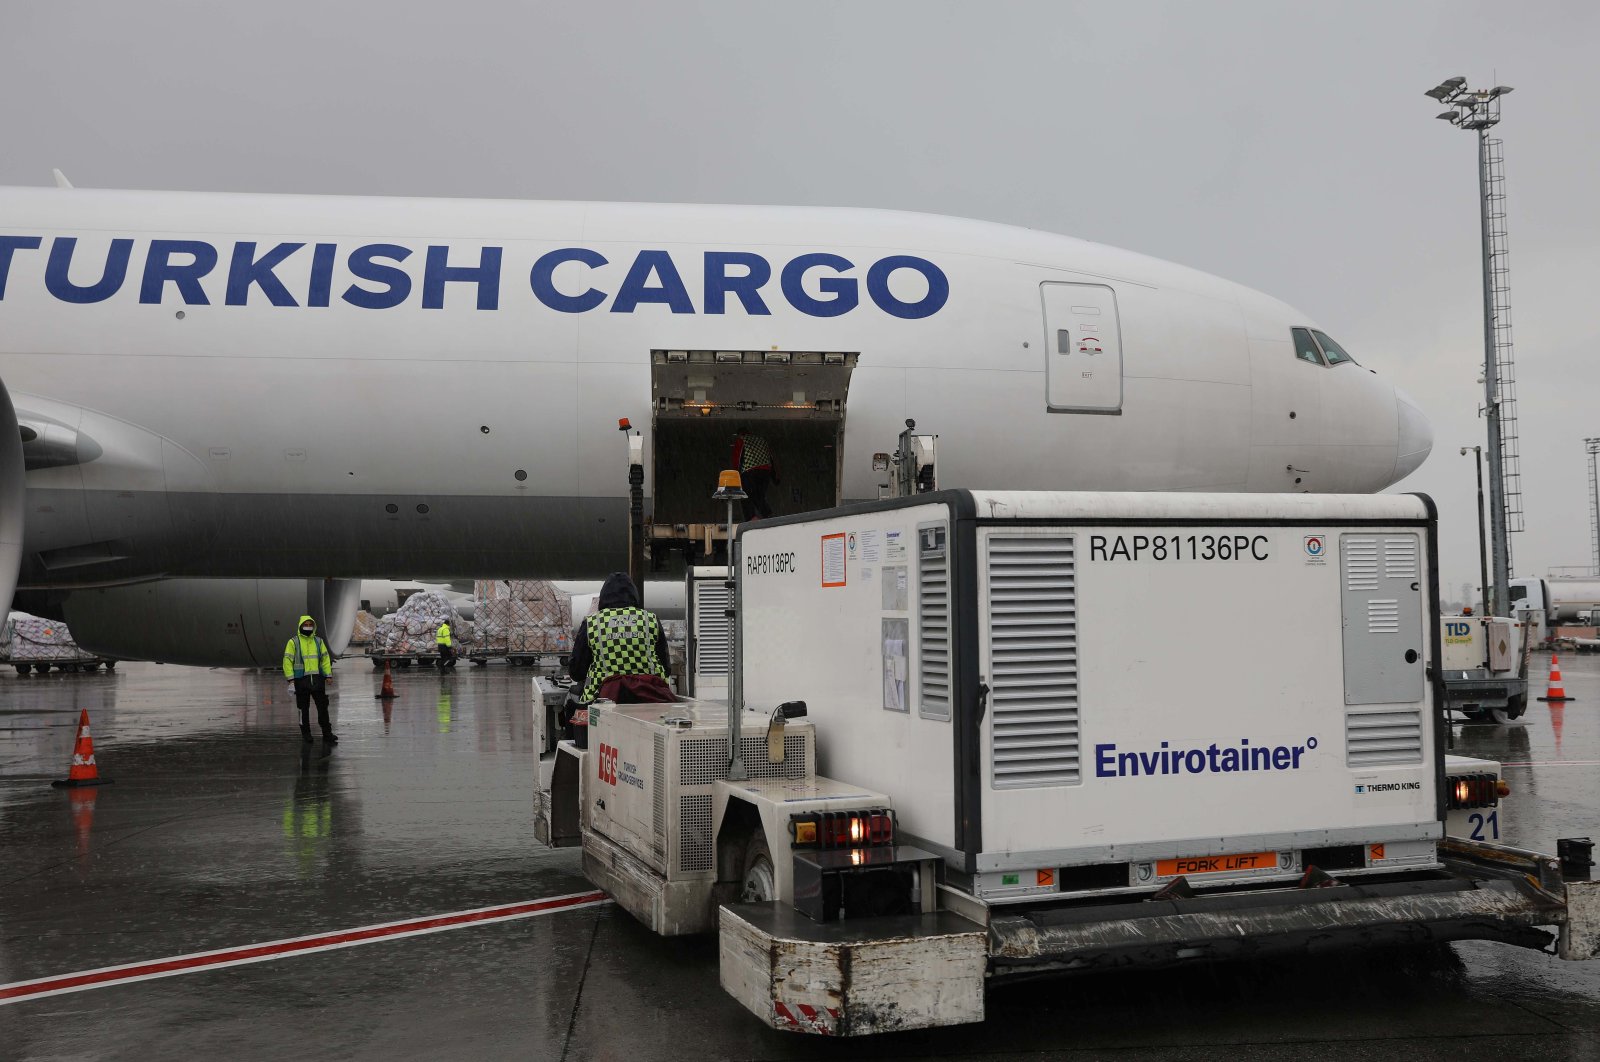 Temperature-controlled containers carrying China's Sinovac COVID-19 vaccines are loaded onto a Turkish Cargo plane at Atatürk airport before departing to Brazil, in Istanbul, Turkey, Nov. 18, 2020. (Turkish Airlines via Reuters)